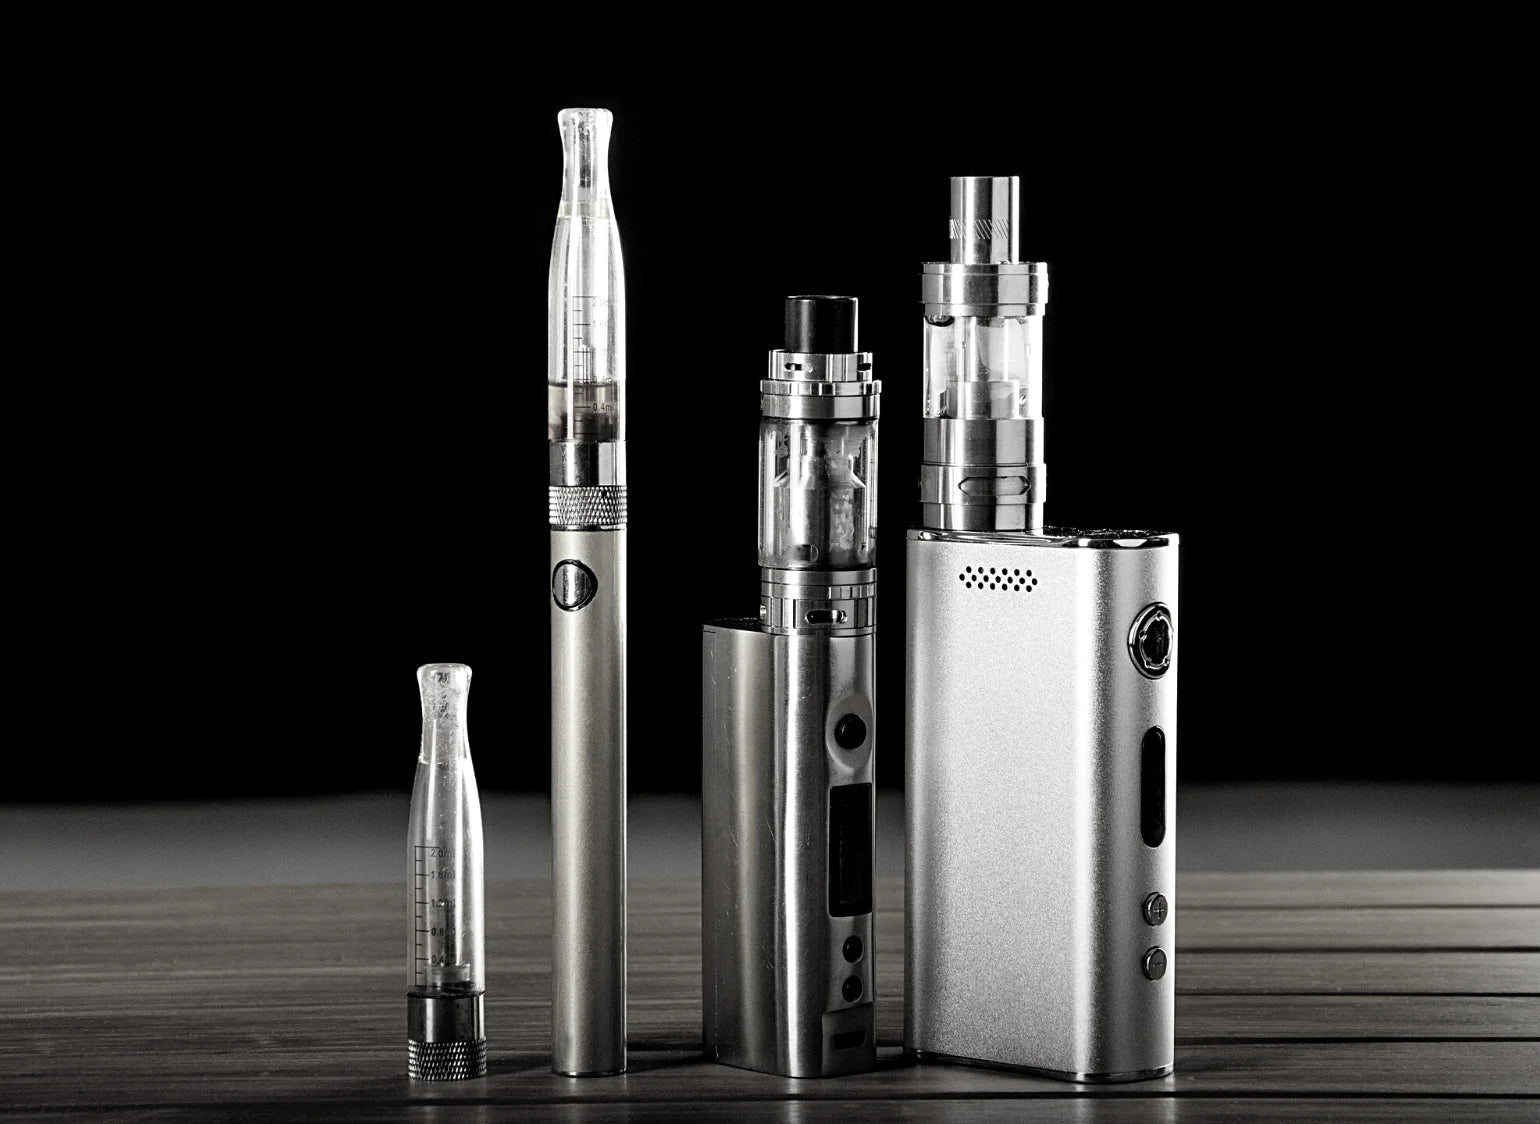 Widest Selection of Cannabis Vapes